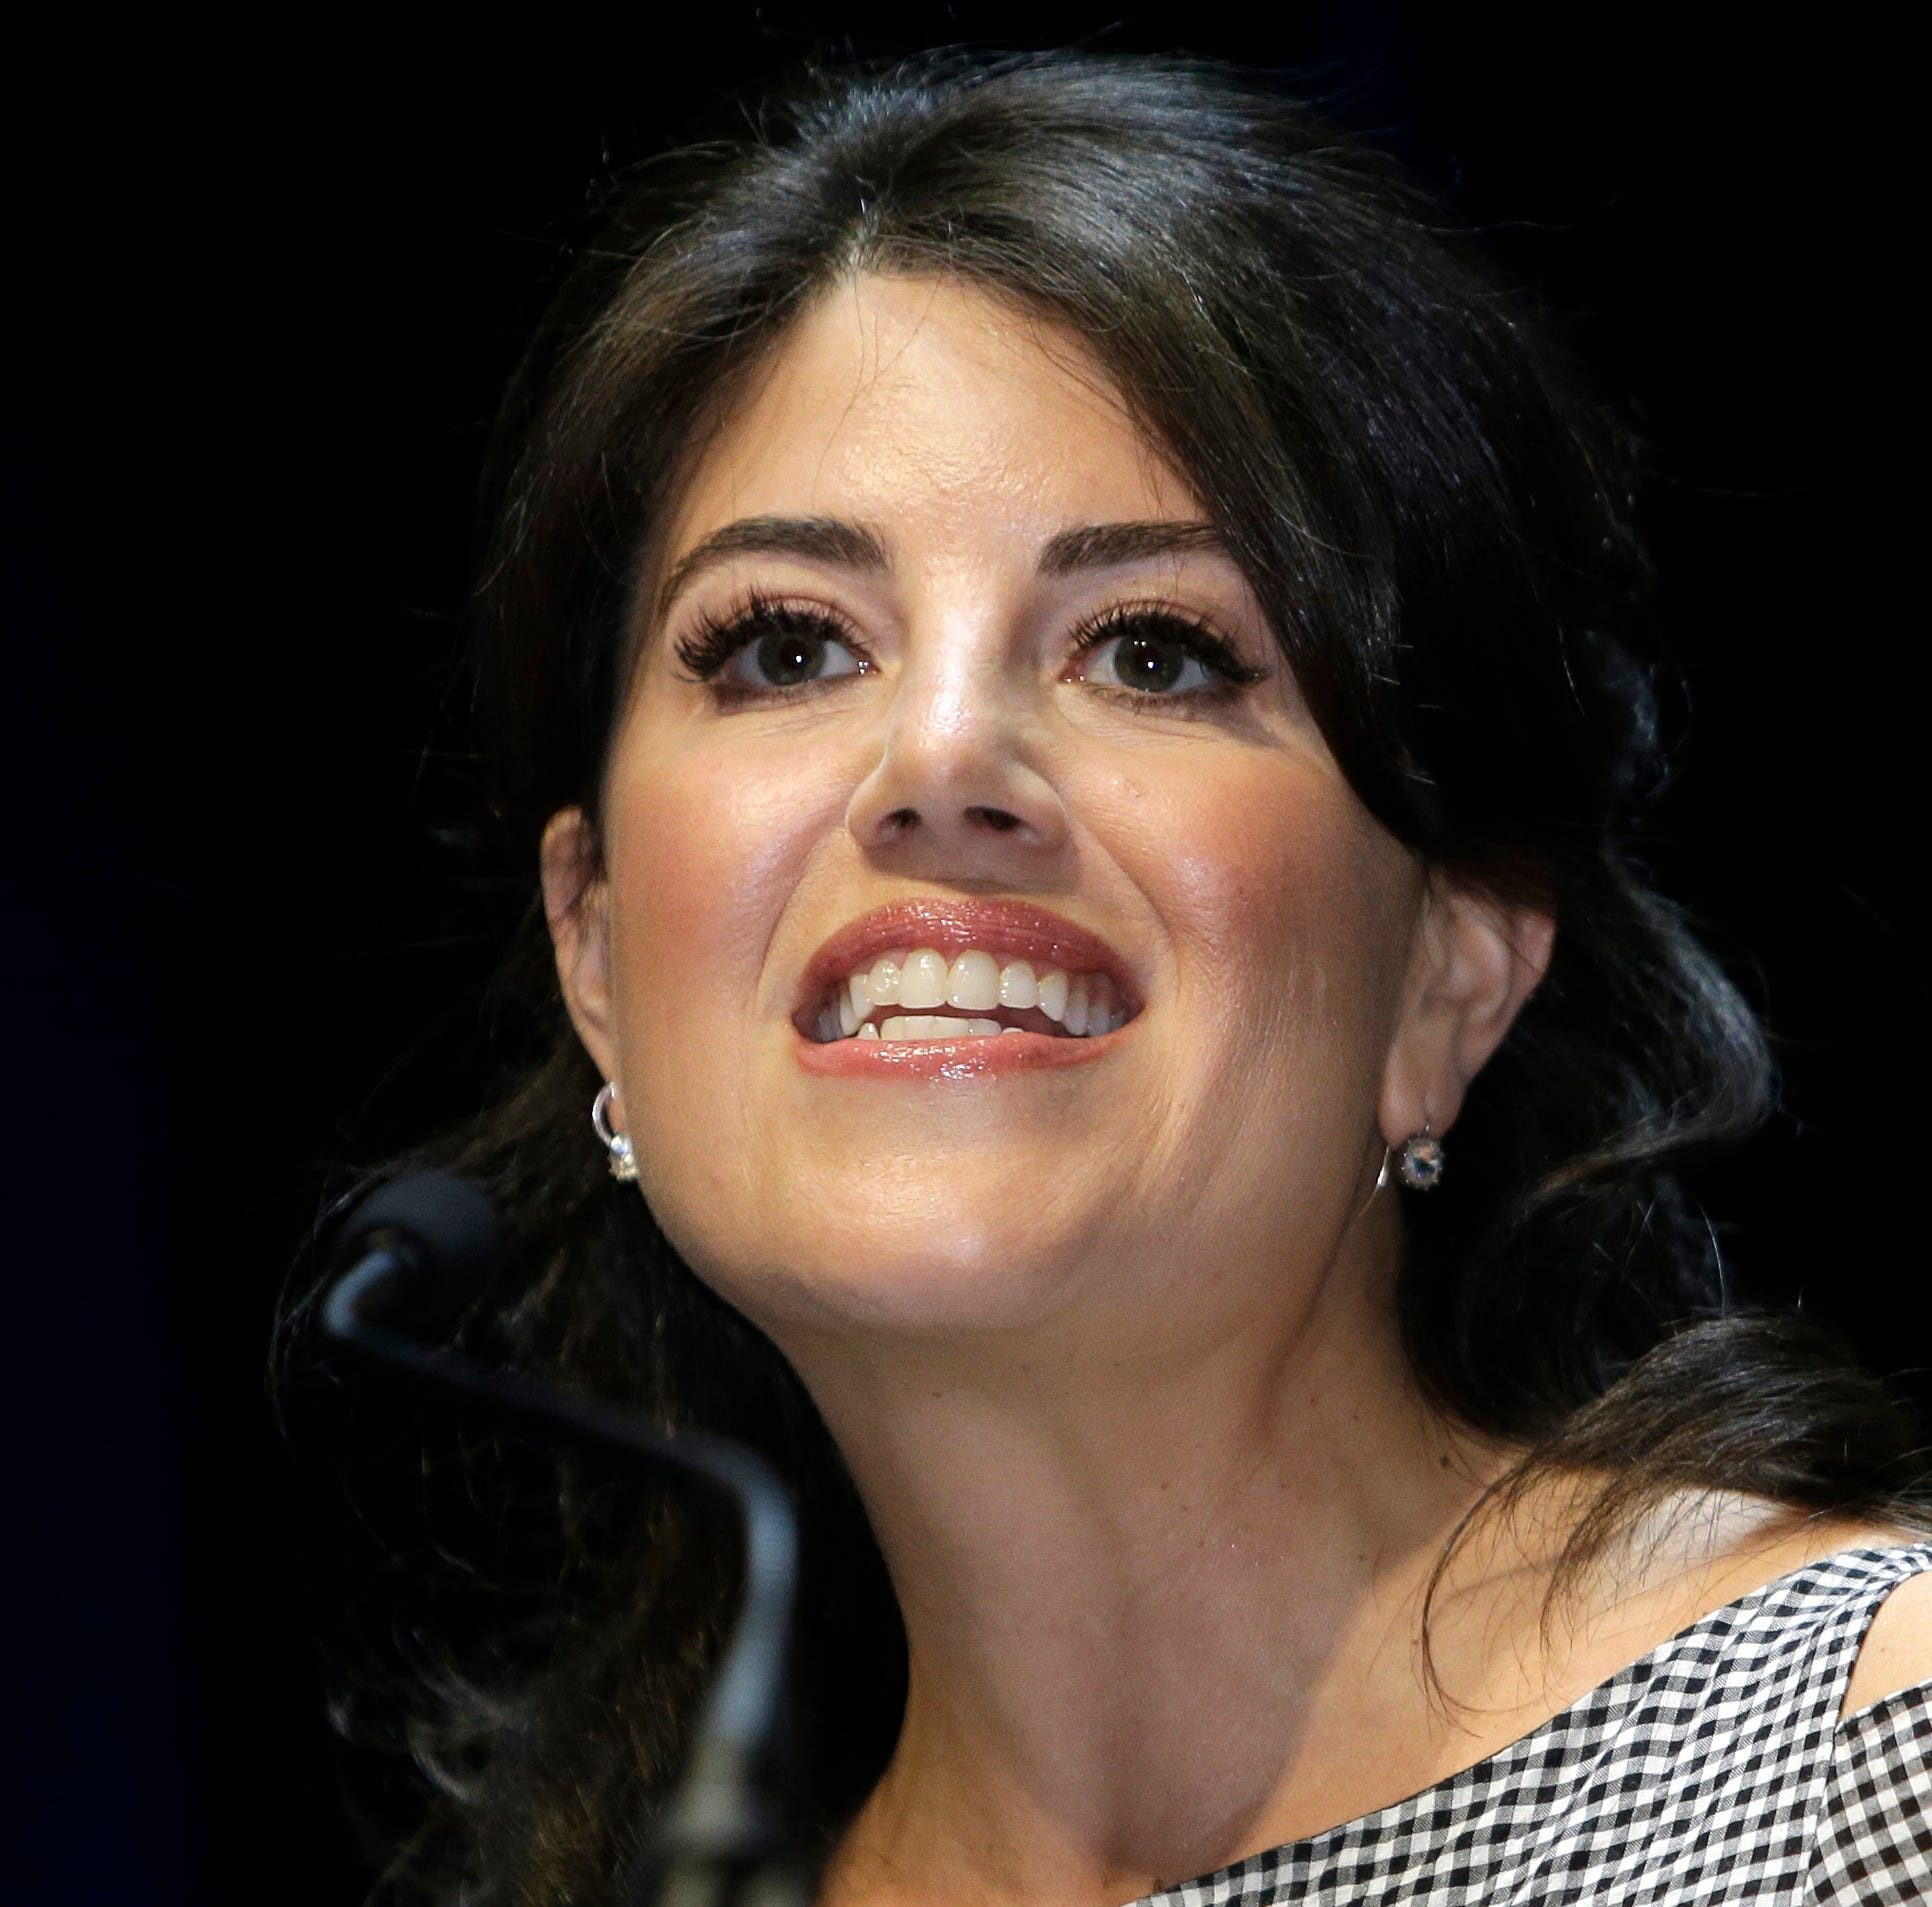 In this June 25, 2015, file photo, Monica Lewinsky attends the Cannes Lions 2015, International Advertising Festival in Cannes, southern France.  Lewinsky says she stormed offstage at a Jerusalem event because of an interviewer's 